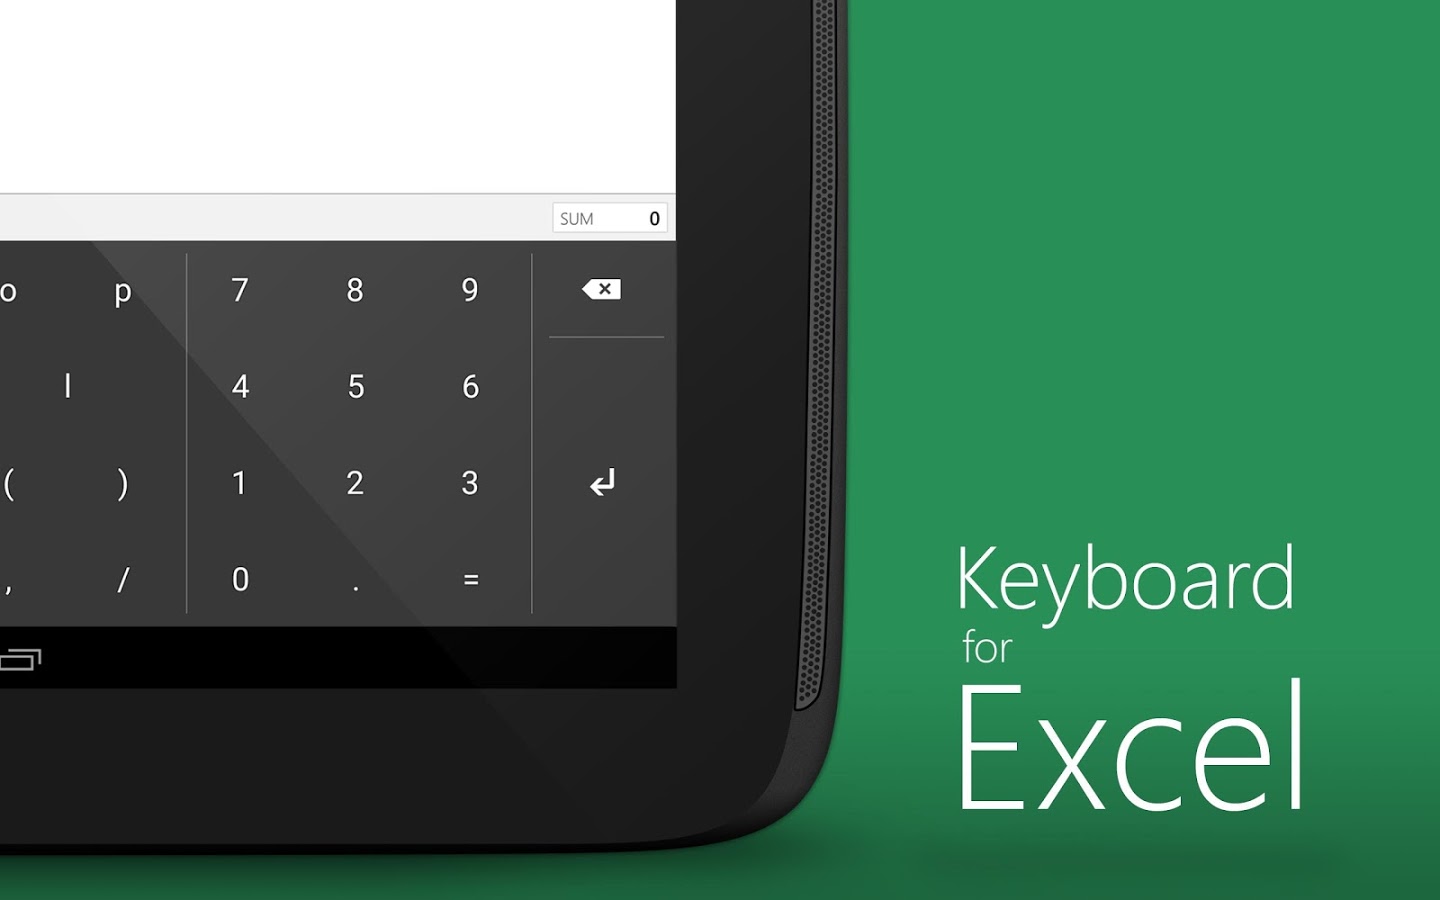 Keyboard for Exce